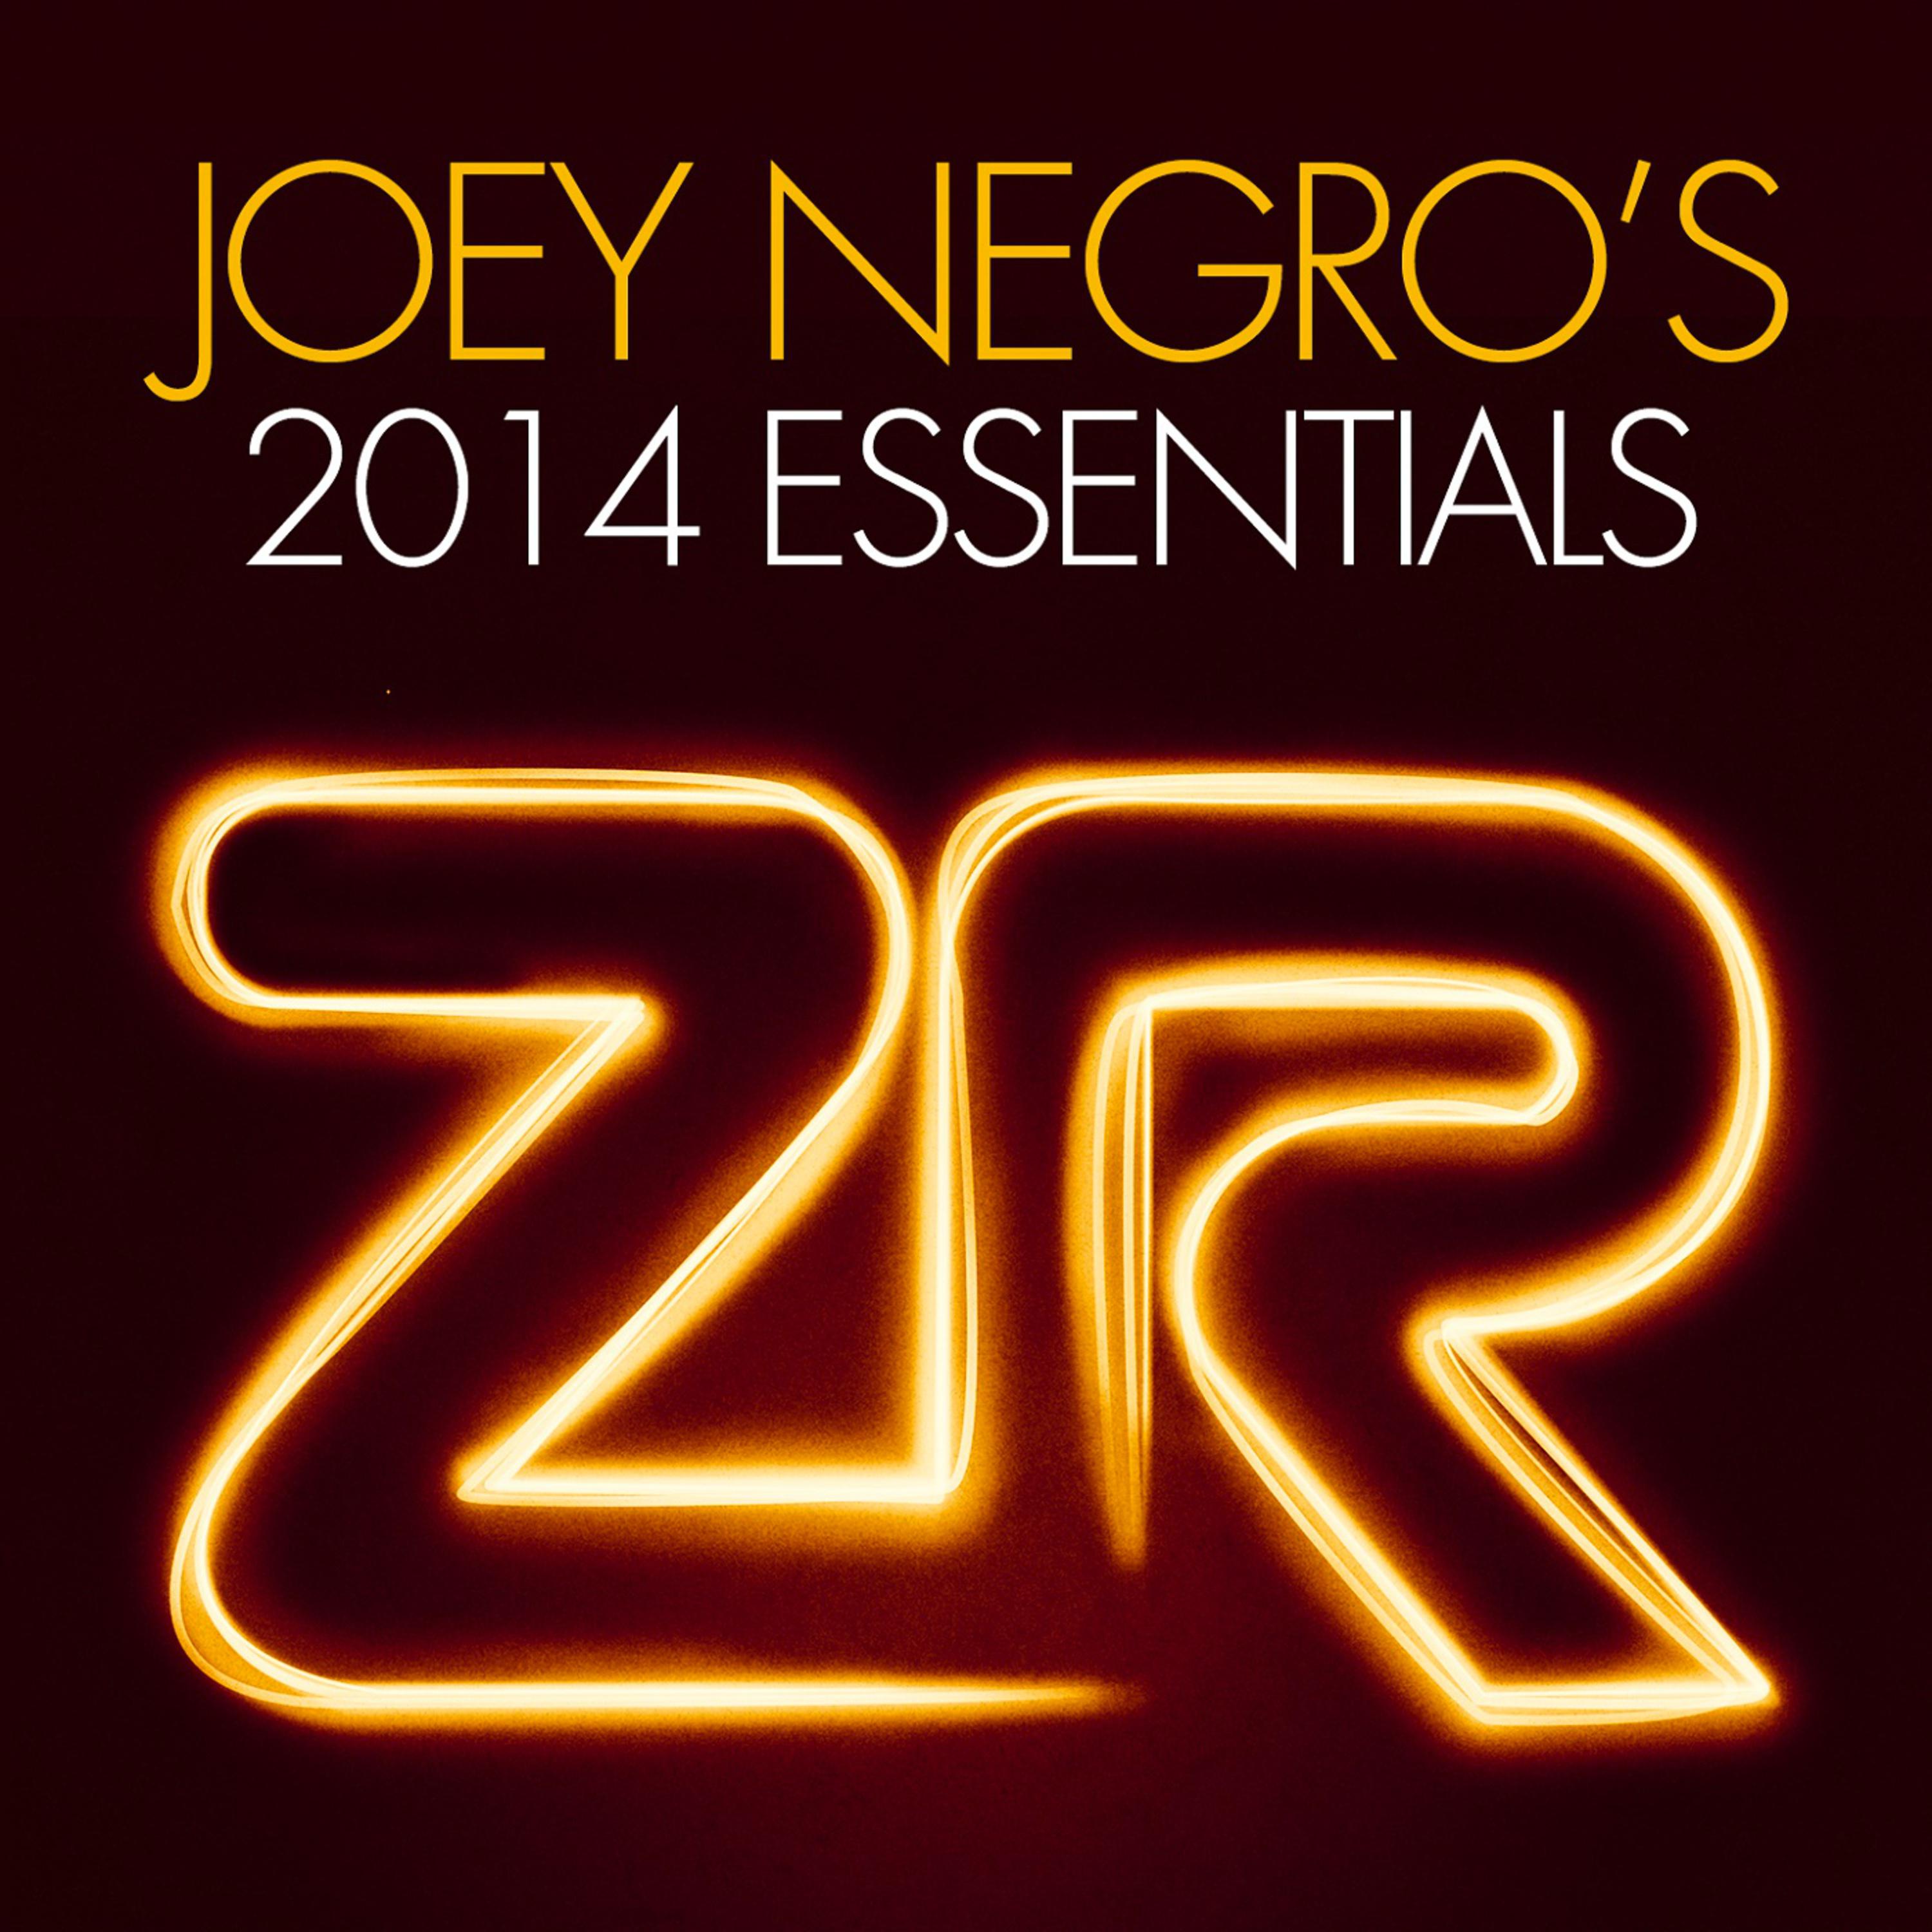 Get In 2 The Music (Joey Negro Chicago Tribute Mix)